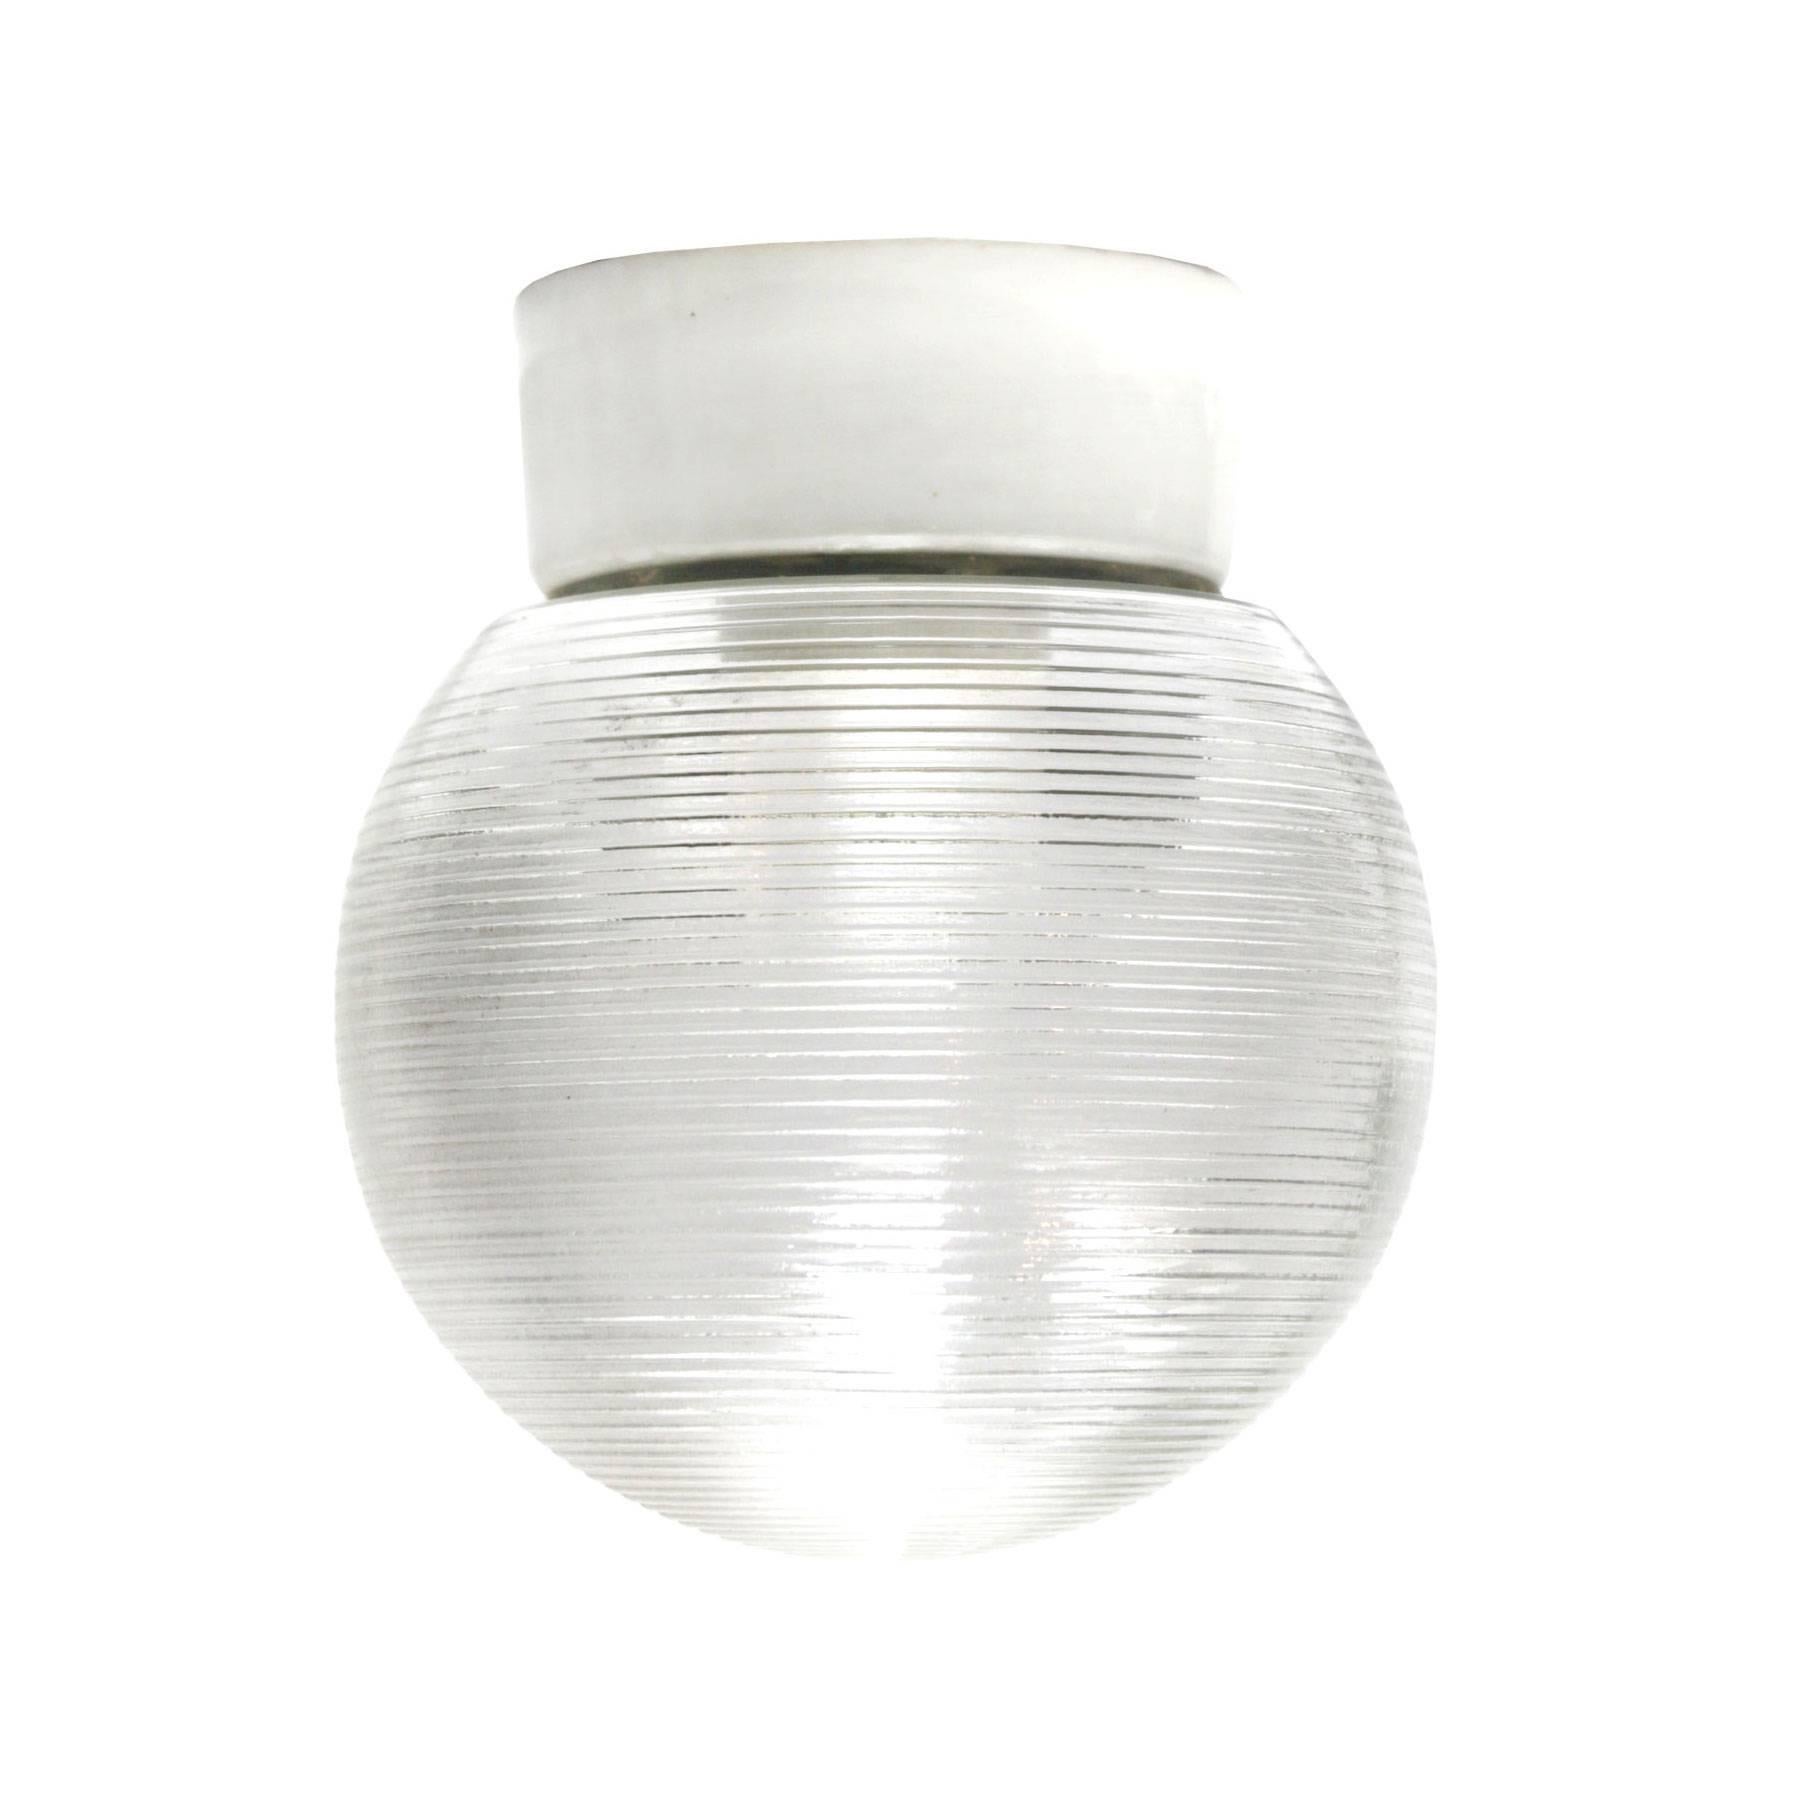 Dicy Halophane S. Industrial ceiling lamp. White porcelain. Striped glass.
Two conductors. No ground.

Weight: 0.9 kg / 2 lb

All lamps have been made suitable by international standards for incandescent light bulbs, energy-efficient and LED